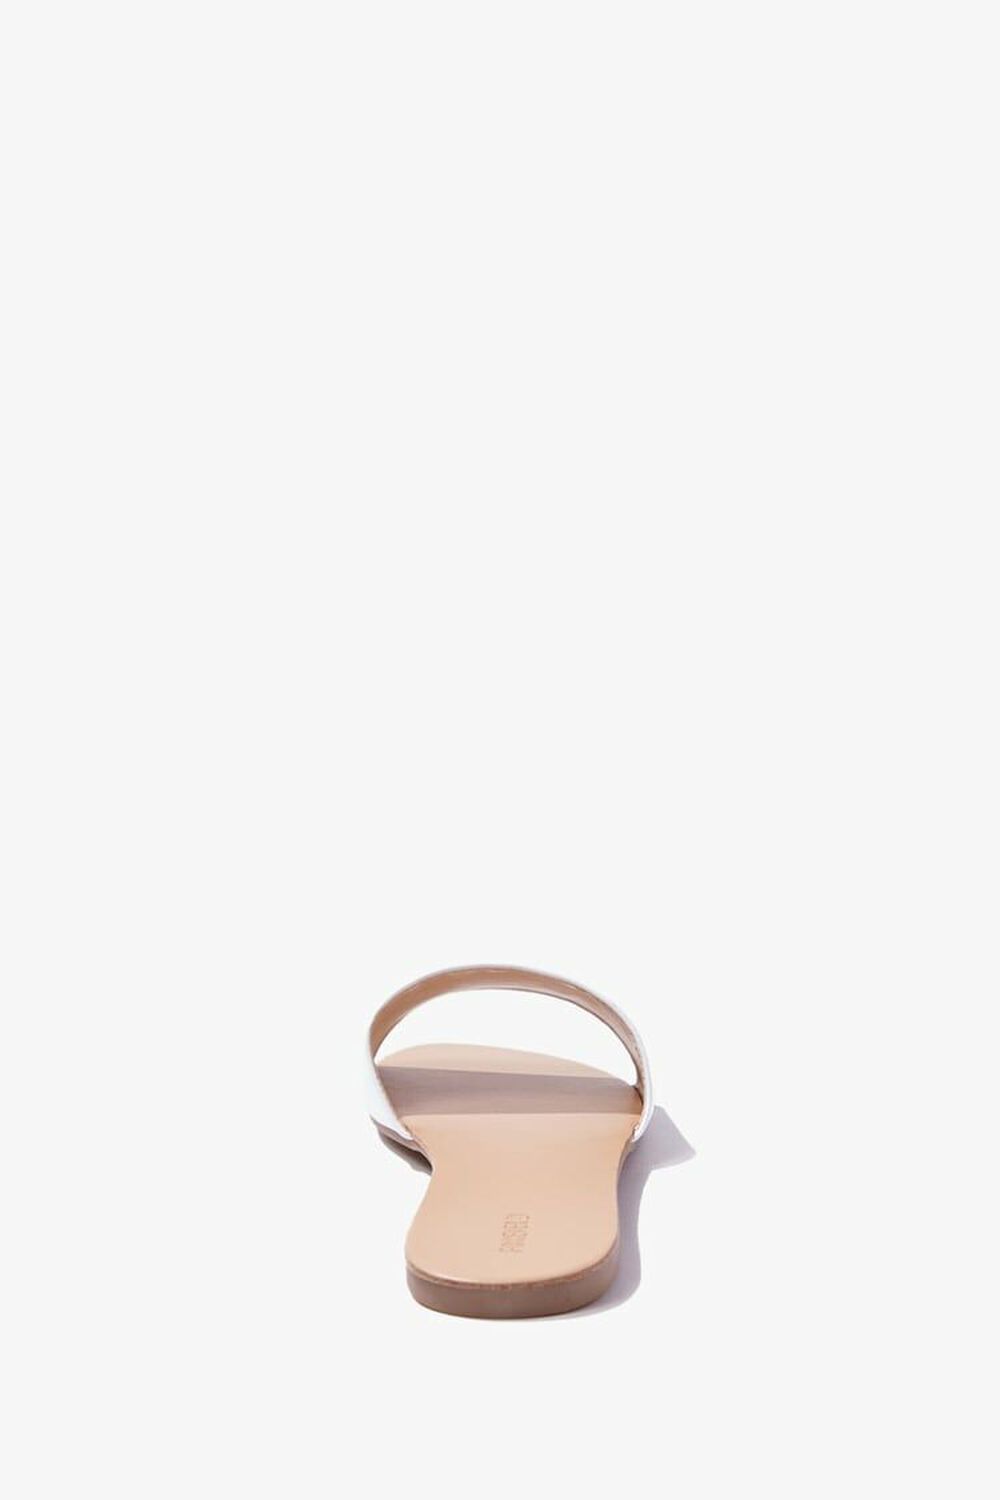 WHITE Faux Leather Sandals, image 2